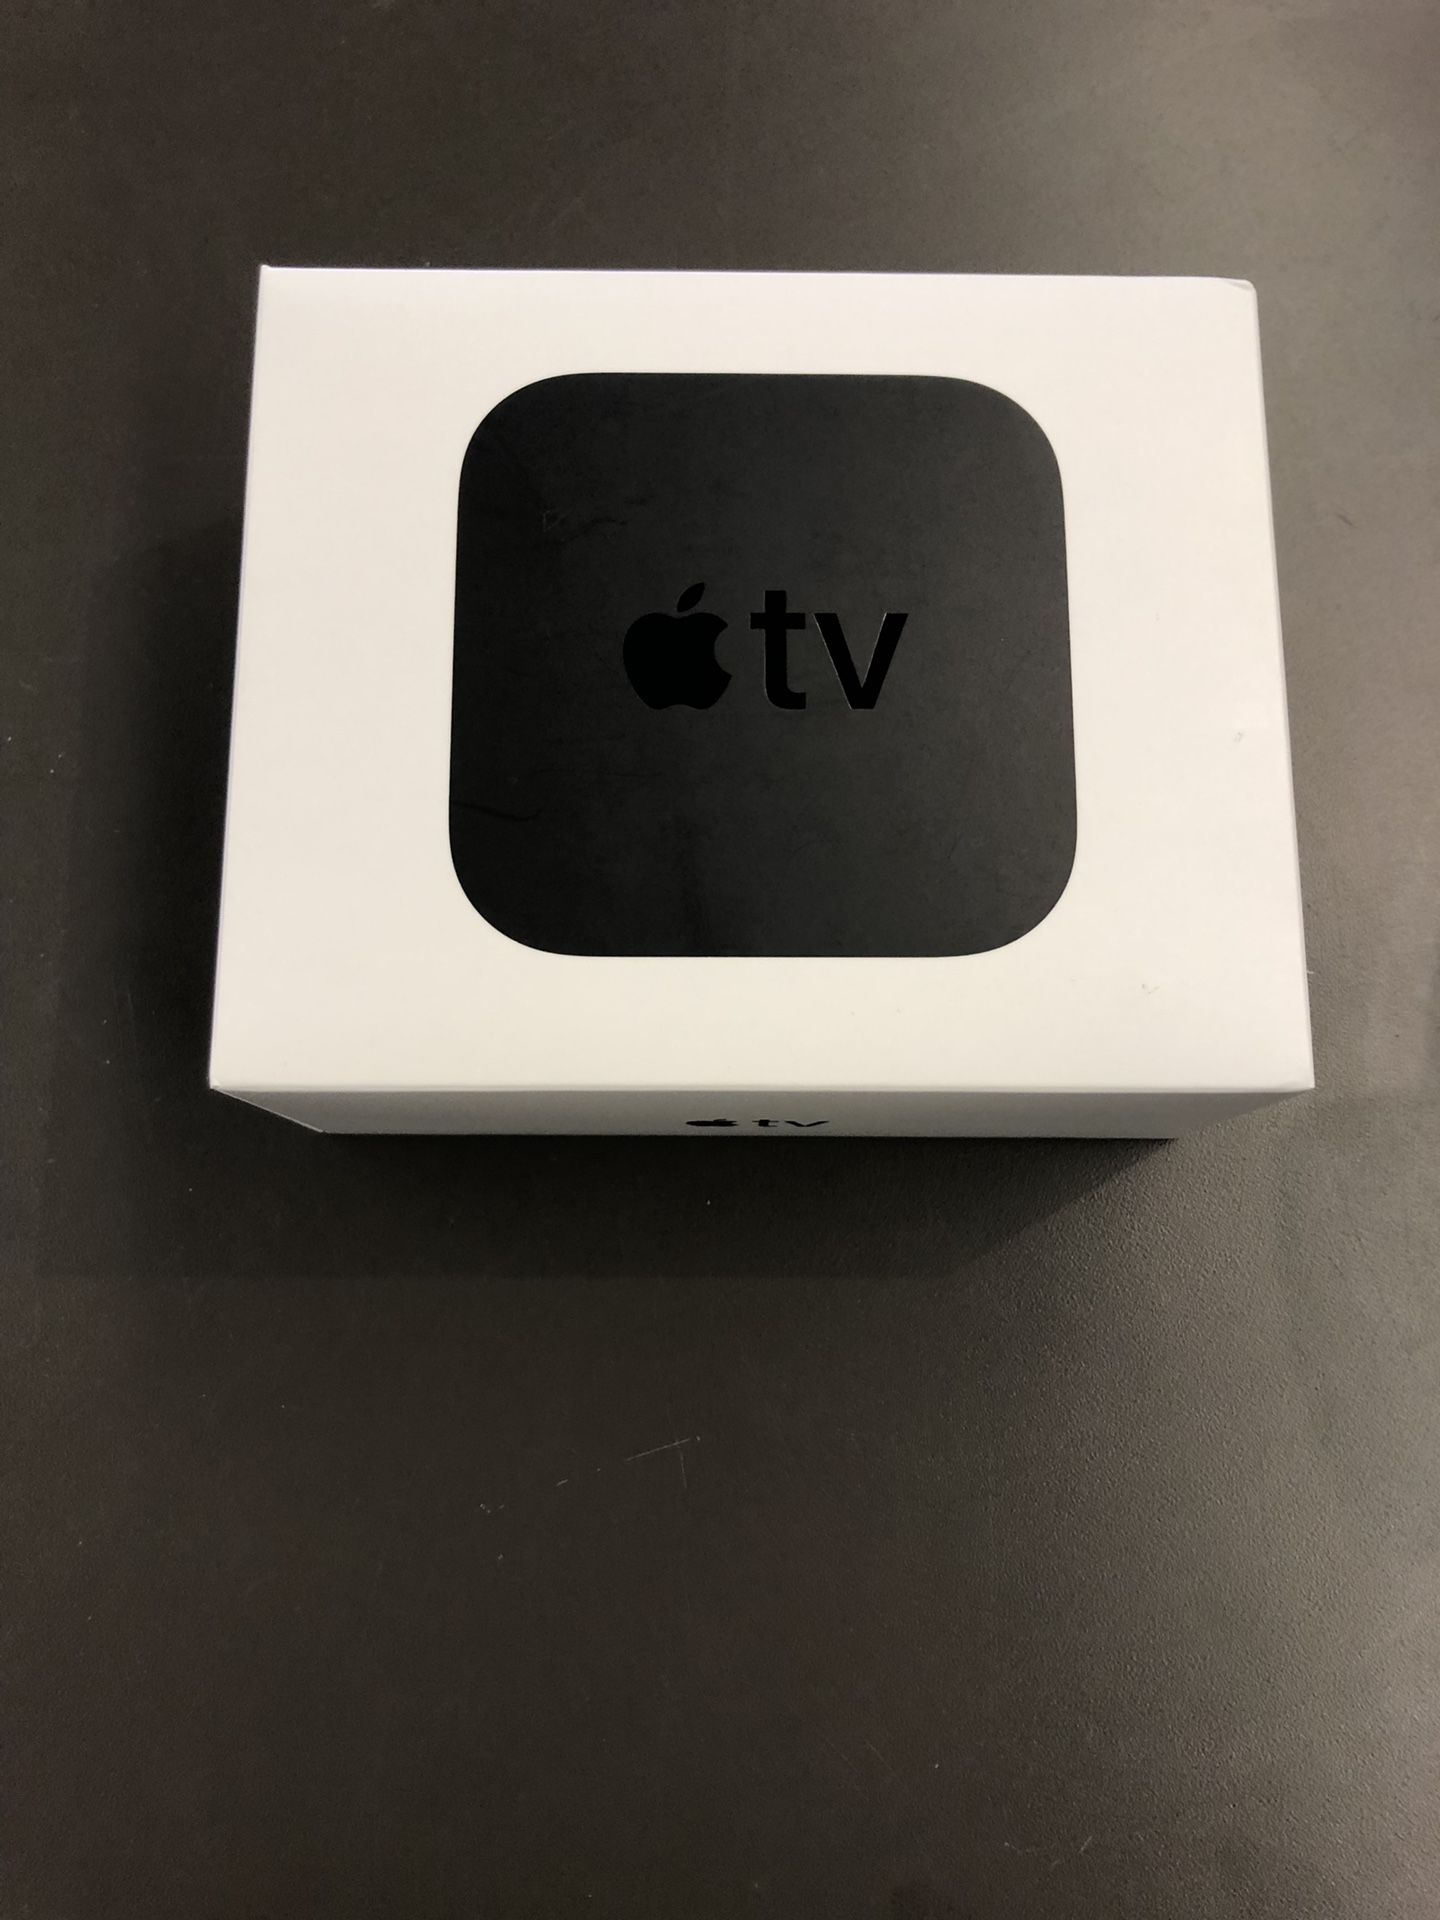 Apple TV 4th Gen w remote and box no trades pick up in Tacoma price is firm